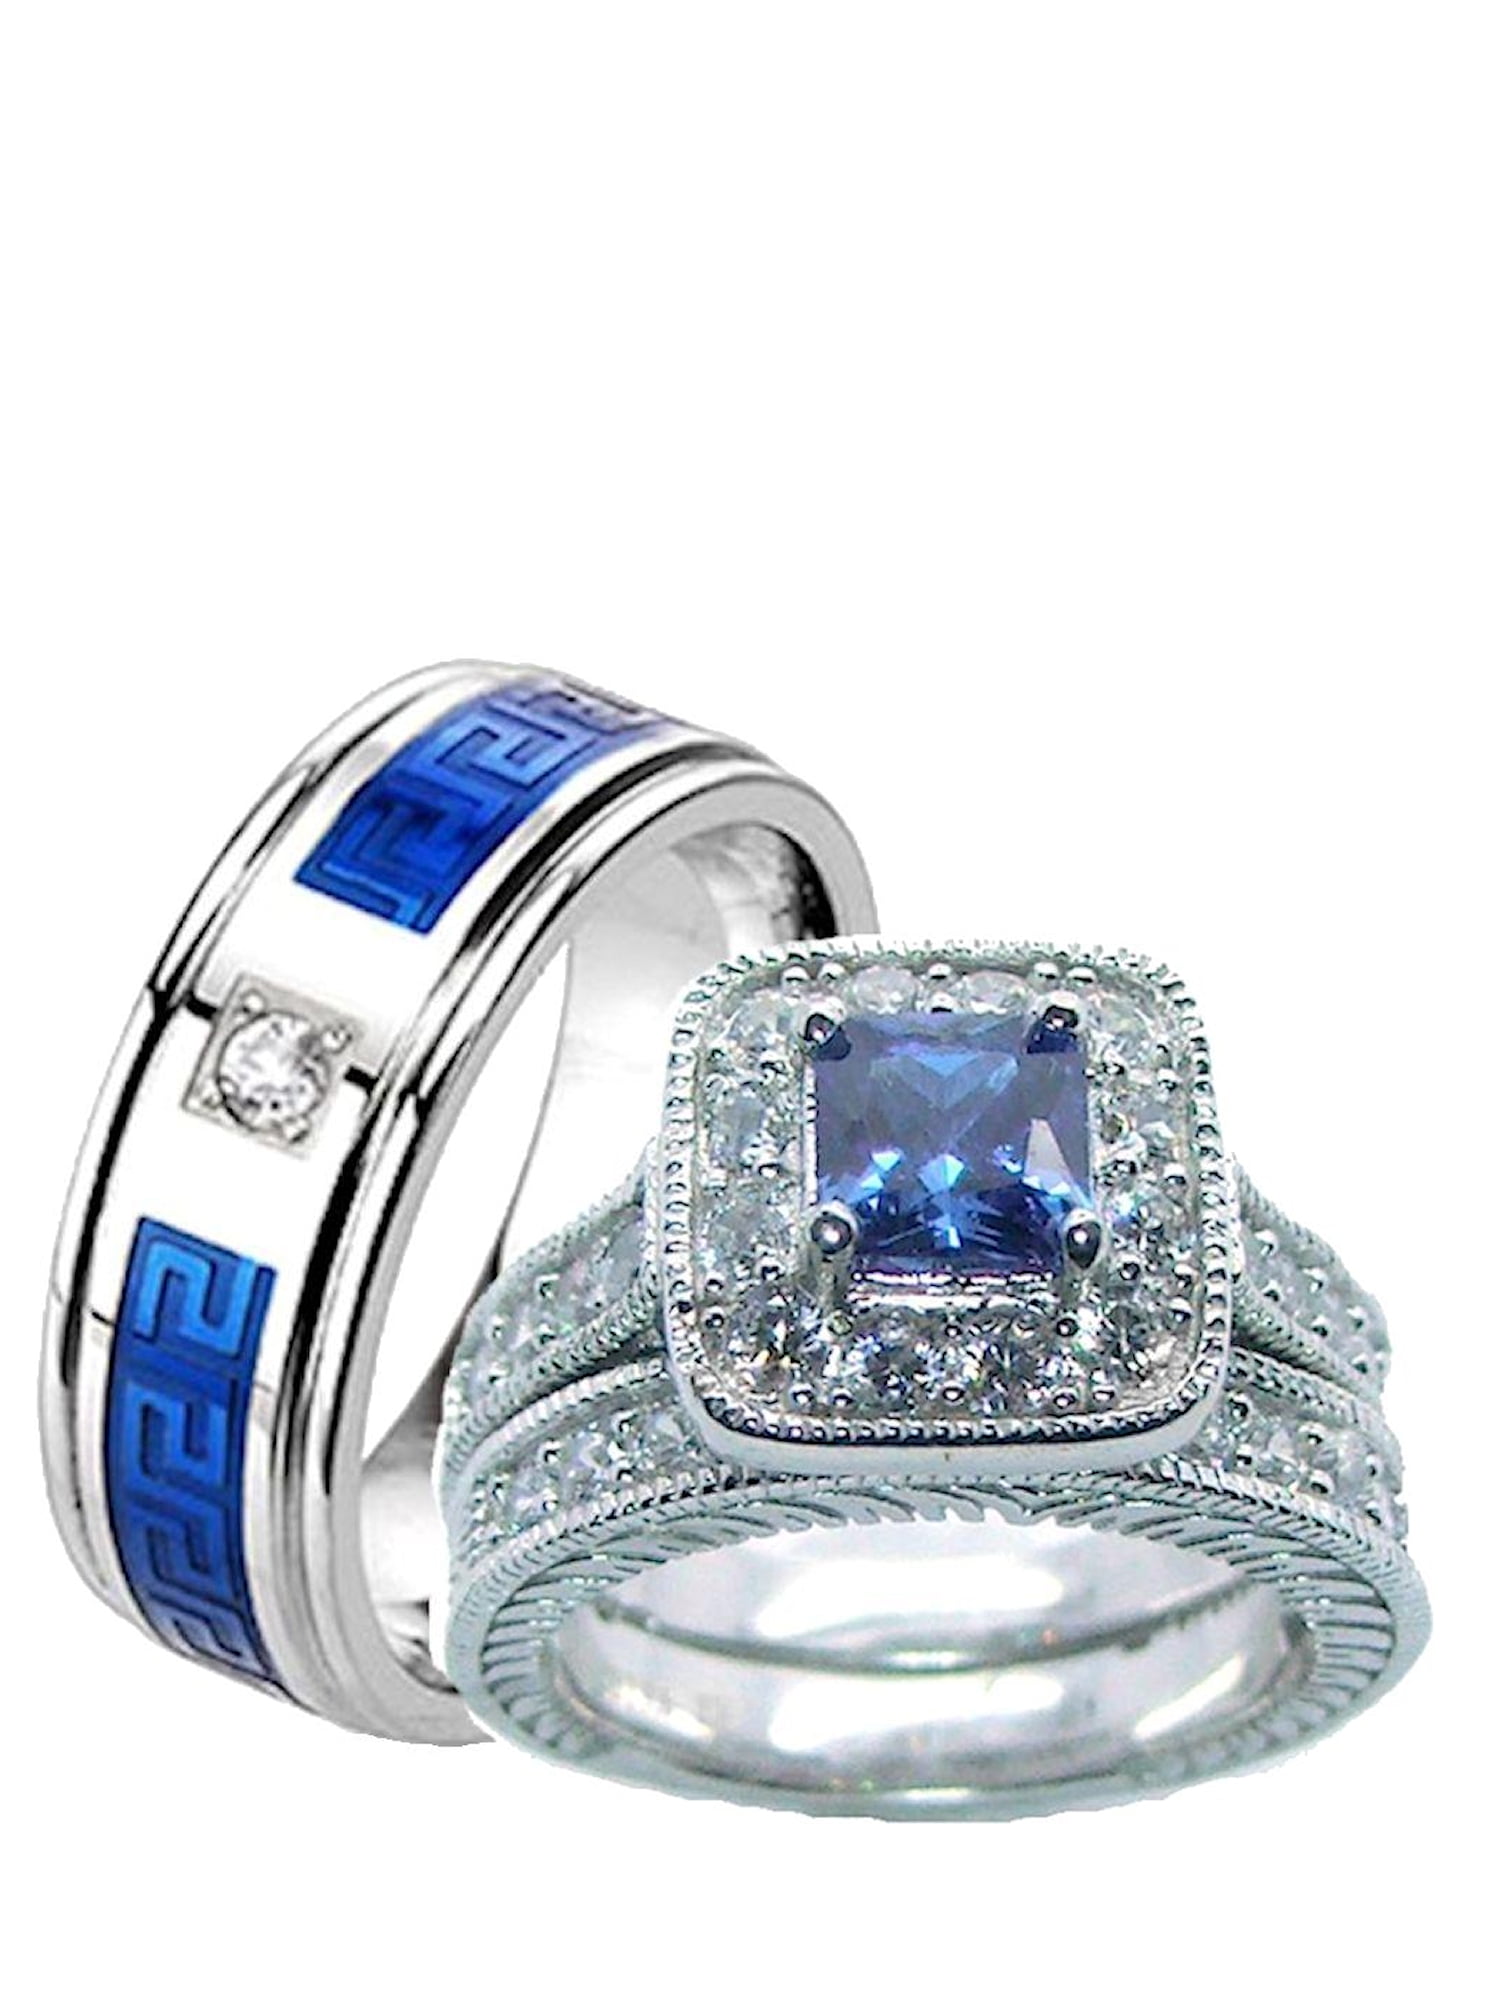 His Stainless Steel and Her Blue Cz Silver Plated Engagement Wedding Ring Set